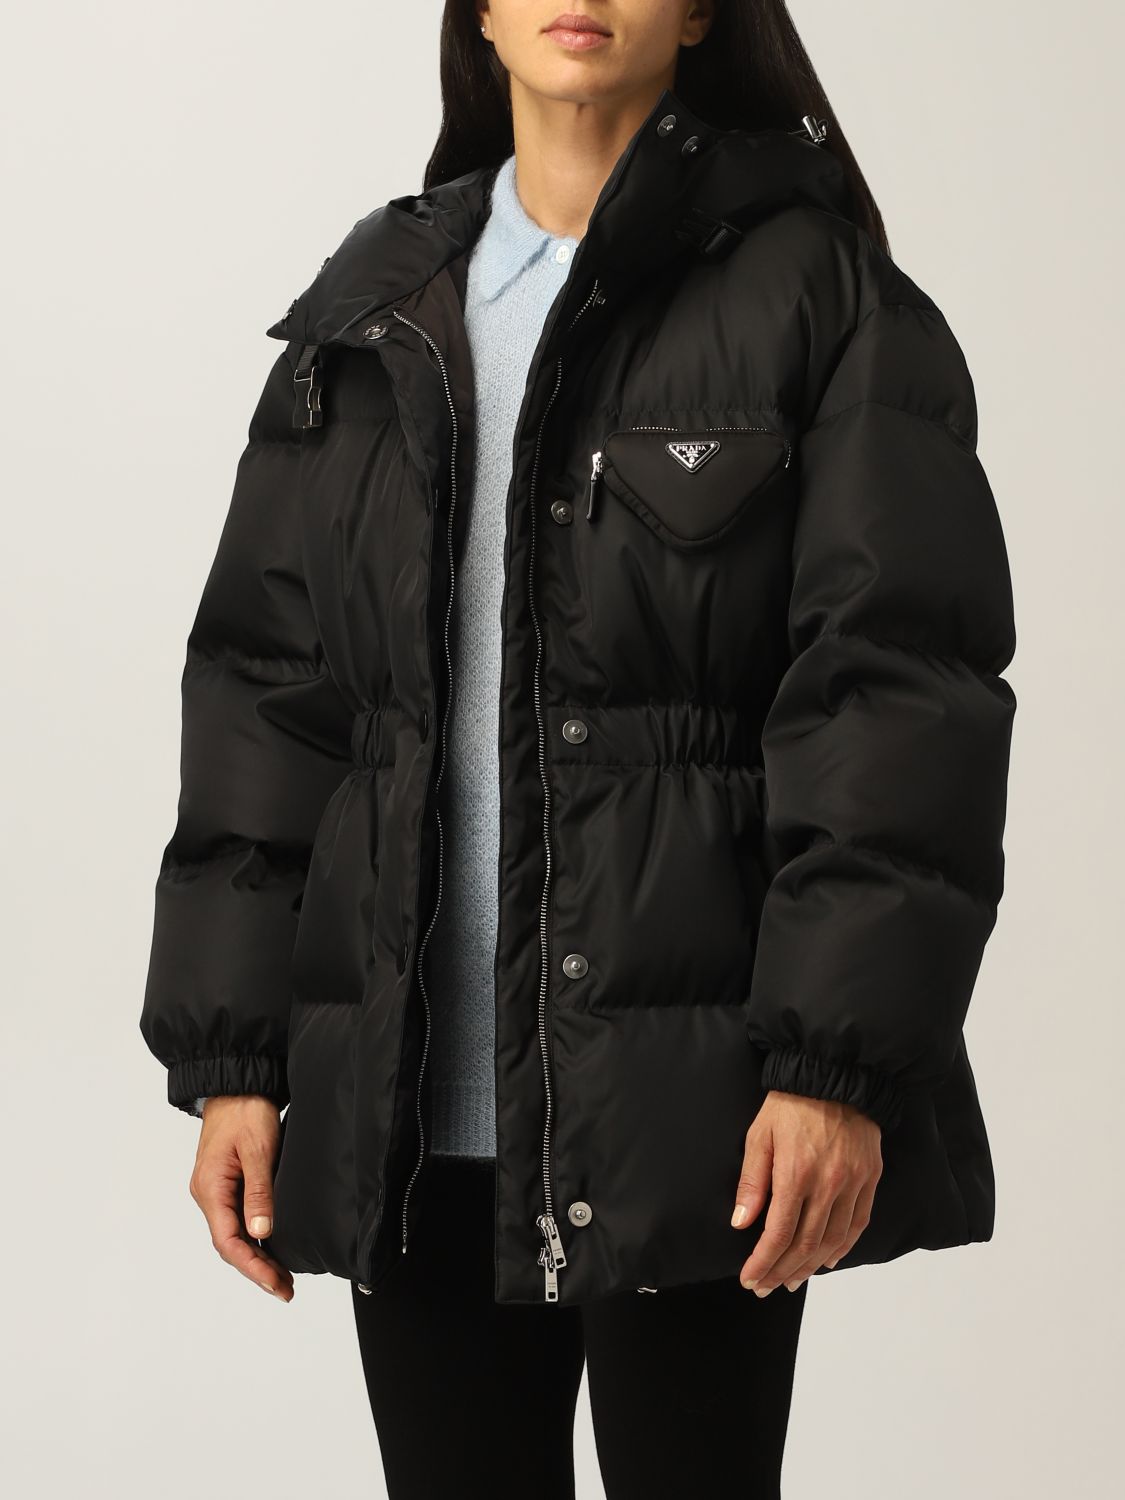 PRADA: quilted re-nylon down jacket with pouch and logo | Jacket Prada ...